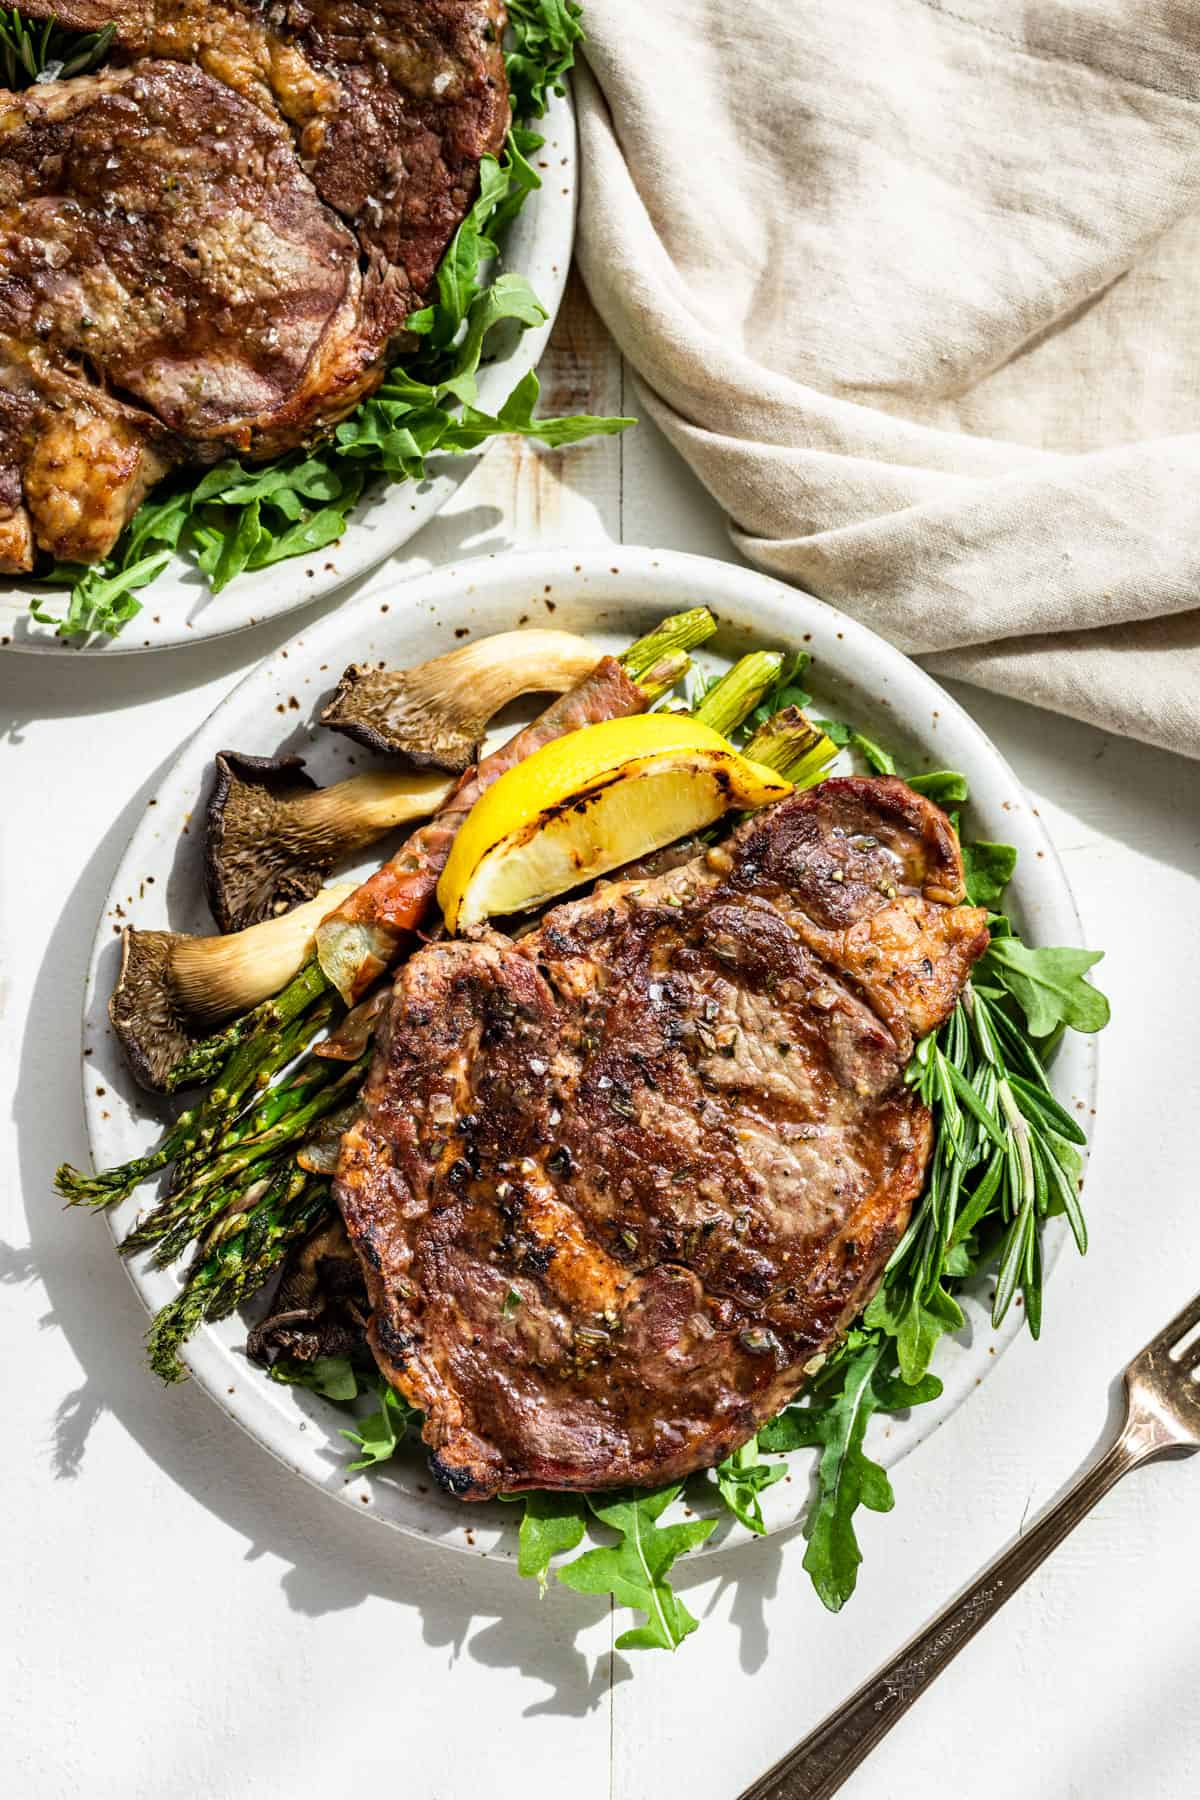 Looking down at two plates with Tuscan Steak on a bed of arugula with a lemon wedge, asparagus, and mushrooms on the side.